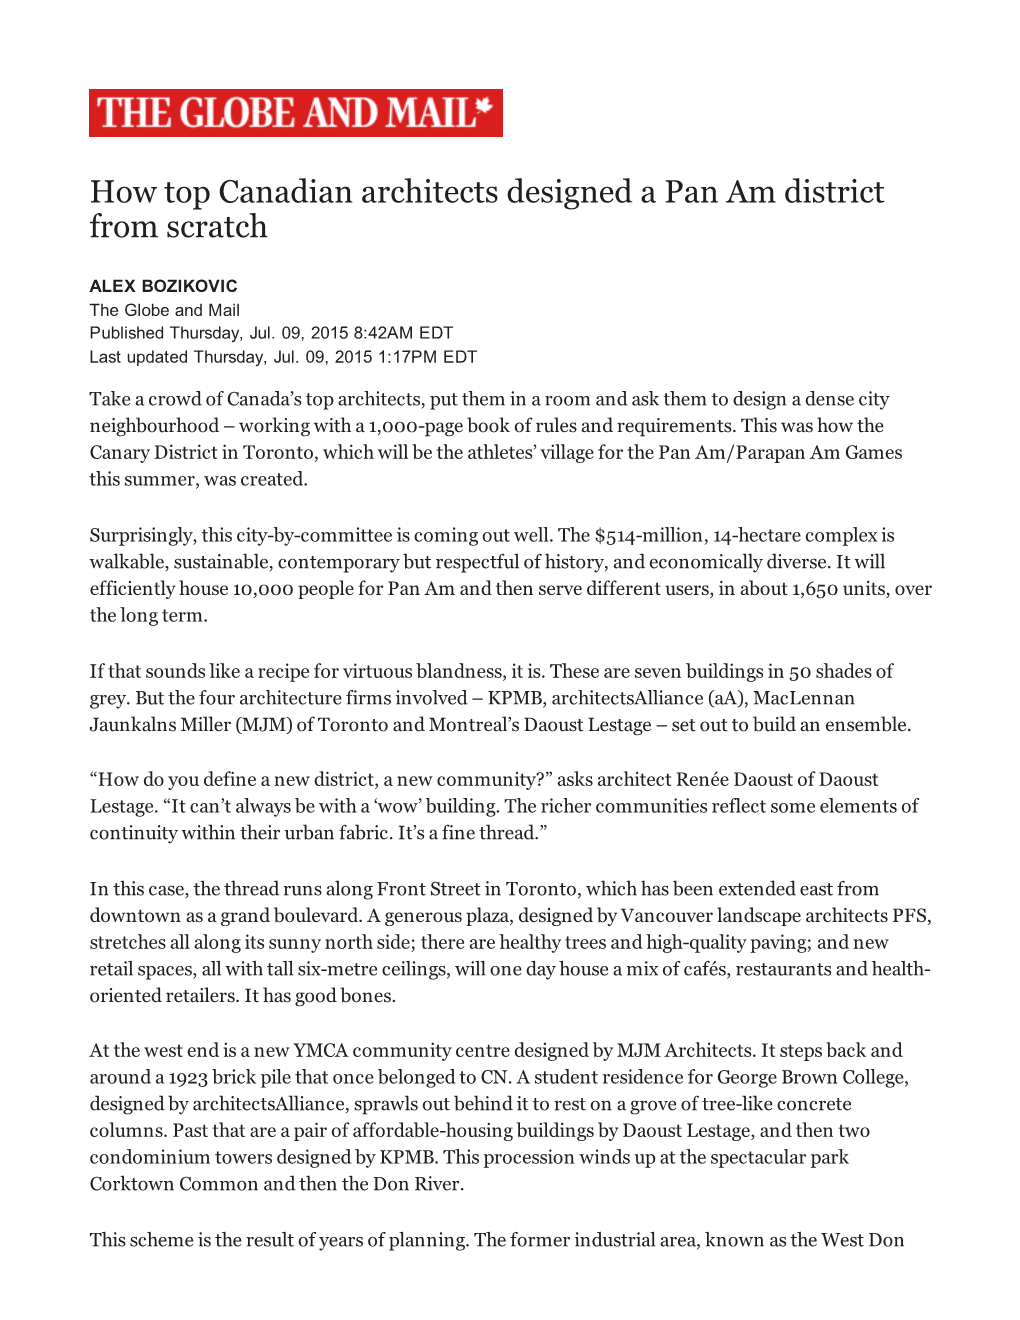 How Top Canadian Architects Designed a Pan Am District from Scratch ­ the Globe and Mail